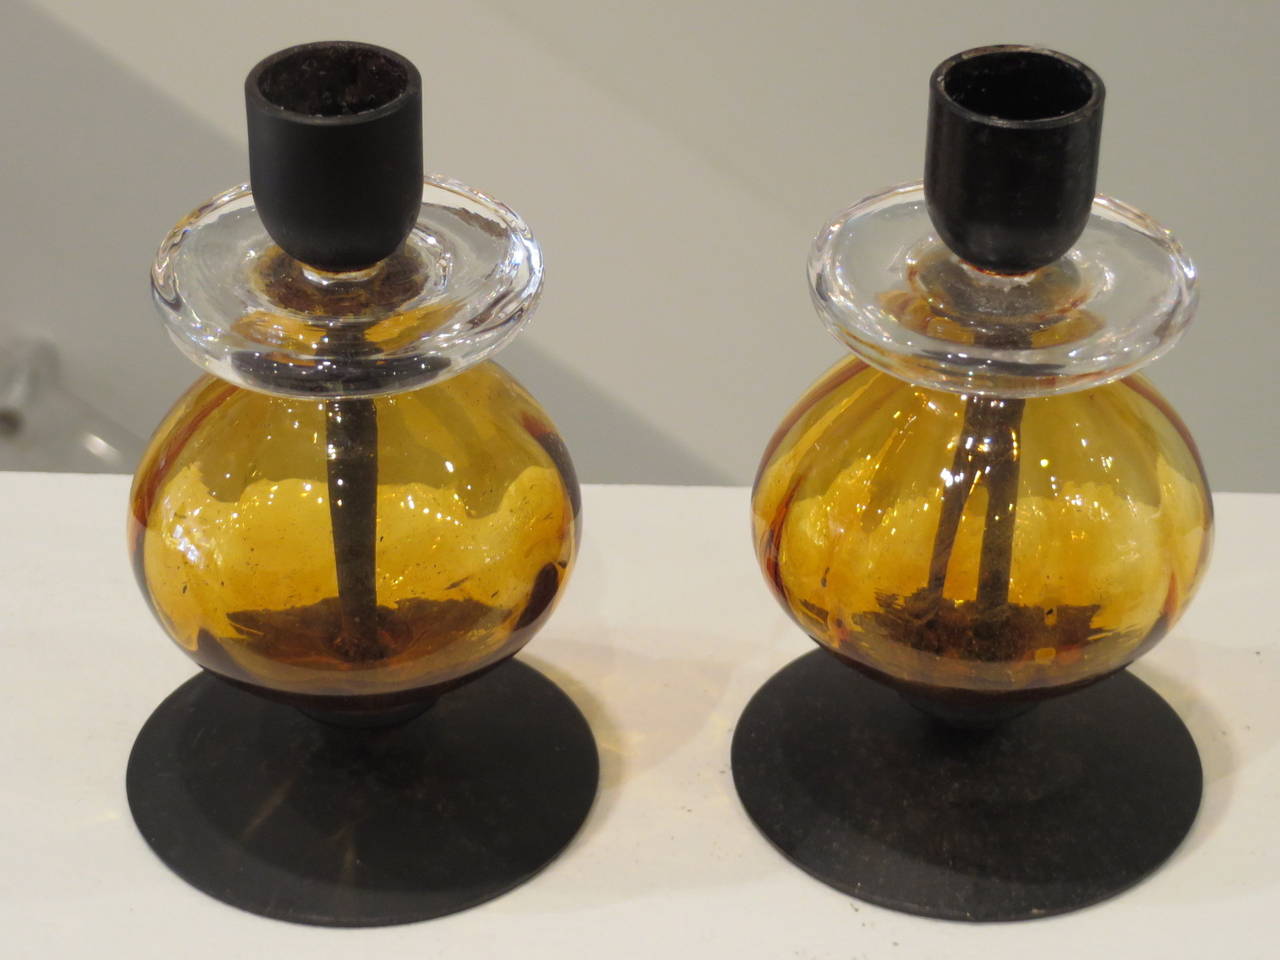 Lovely pair of amber, with clear glass and wrought iron candlesticks by Erik Hoglund for Kosta Boda.